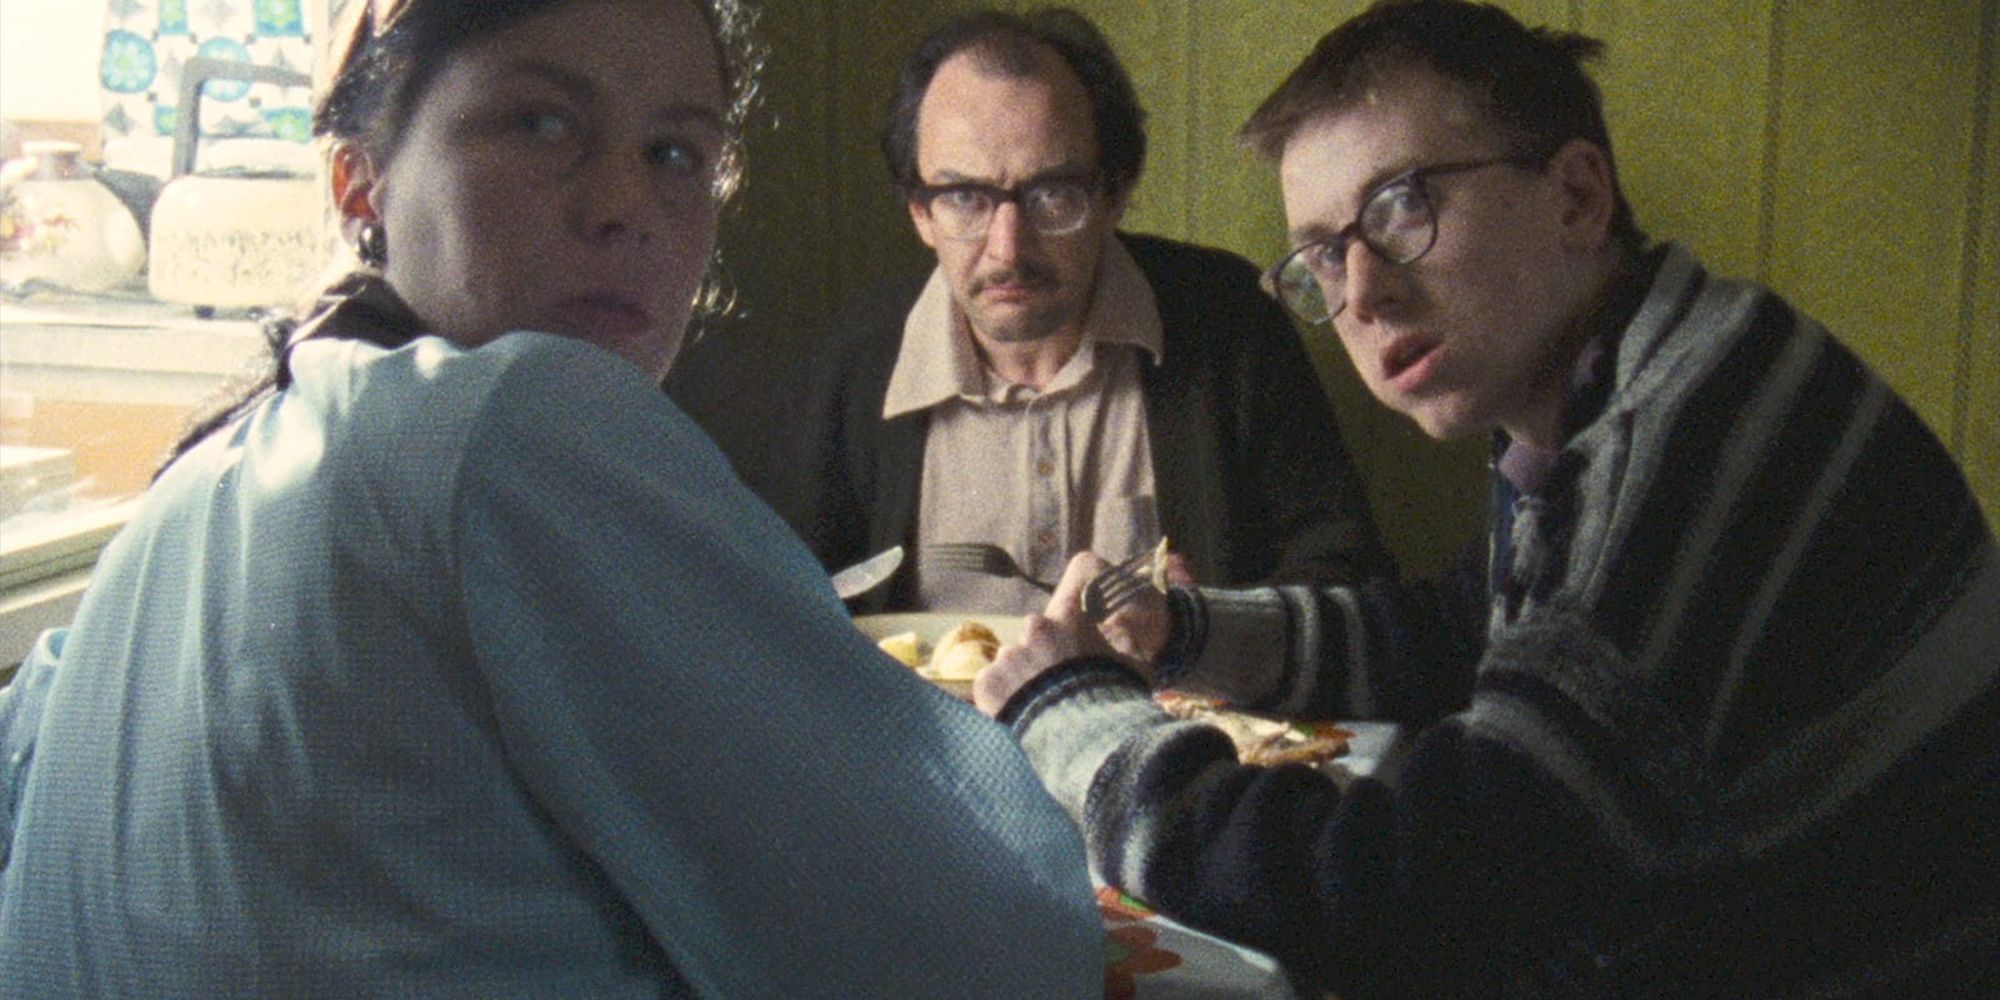 Tim Roth, Pam Ferris, and Jeffrey Robert as Colin, Mavis, and Frank, eating in a restaurant in Meantime